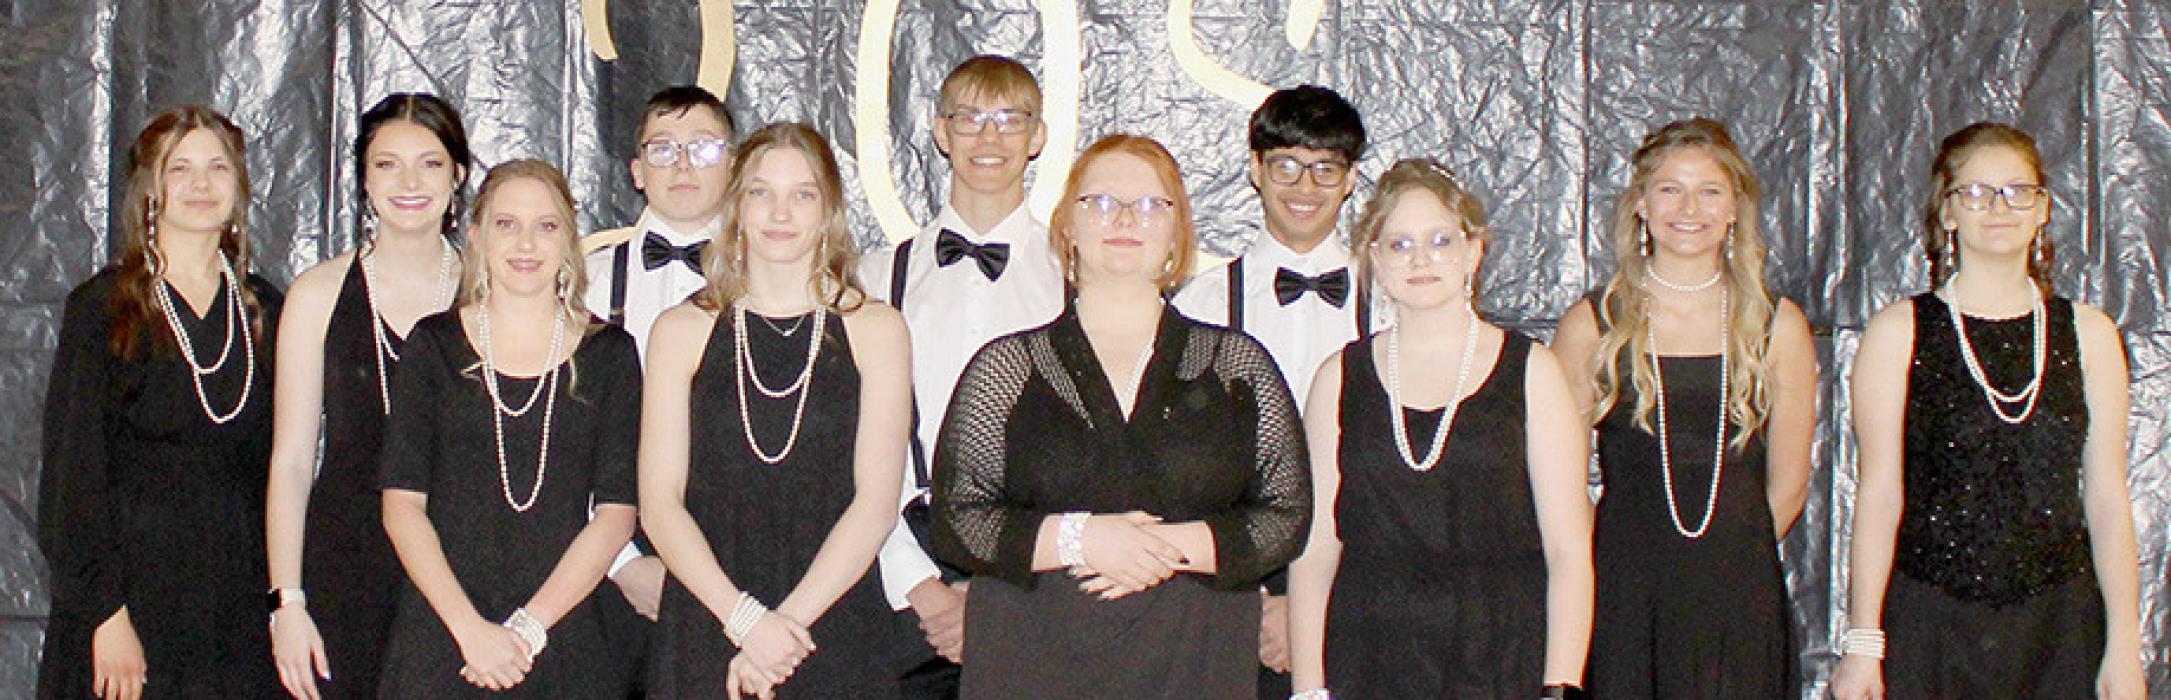 A total of eleven sophomores were elected to serve the upperclassmen at the prom banquet. This year’s prom servers were (Front Row - Left to Right): Preselyn Goochey, Jolyn Pozehl, Ella McLeod, Abigail Burton; (Back Row - Left to Right): Miah Ortner, Brianna Starkey, Ryan Salzman, Aiden Jackman, Angel Ajin, Emma Kennedy and Abigail Paulson.